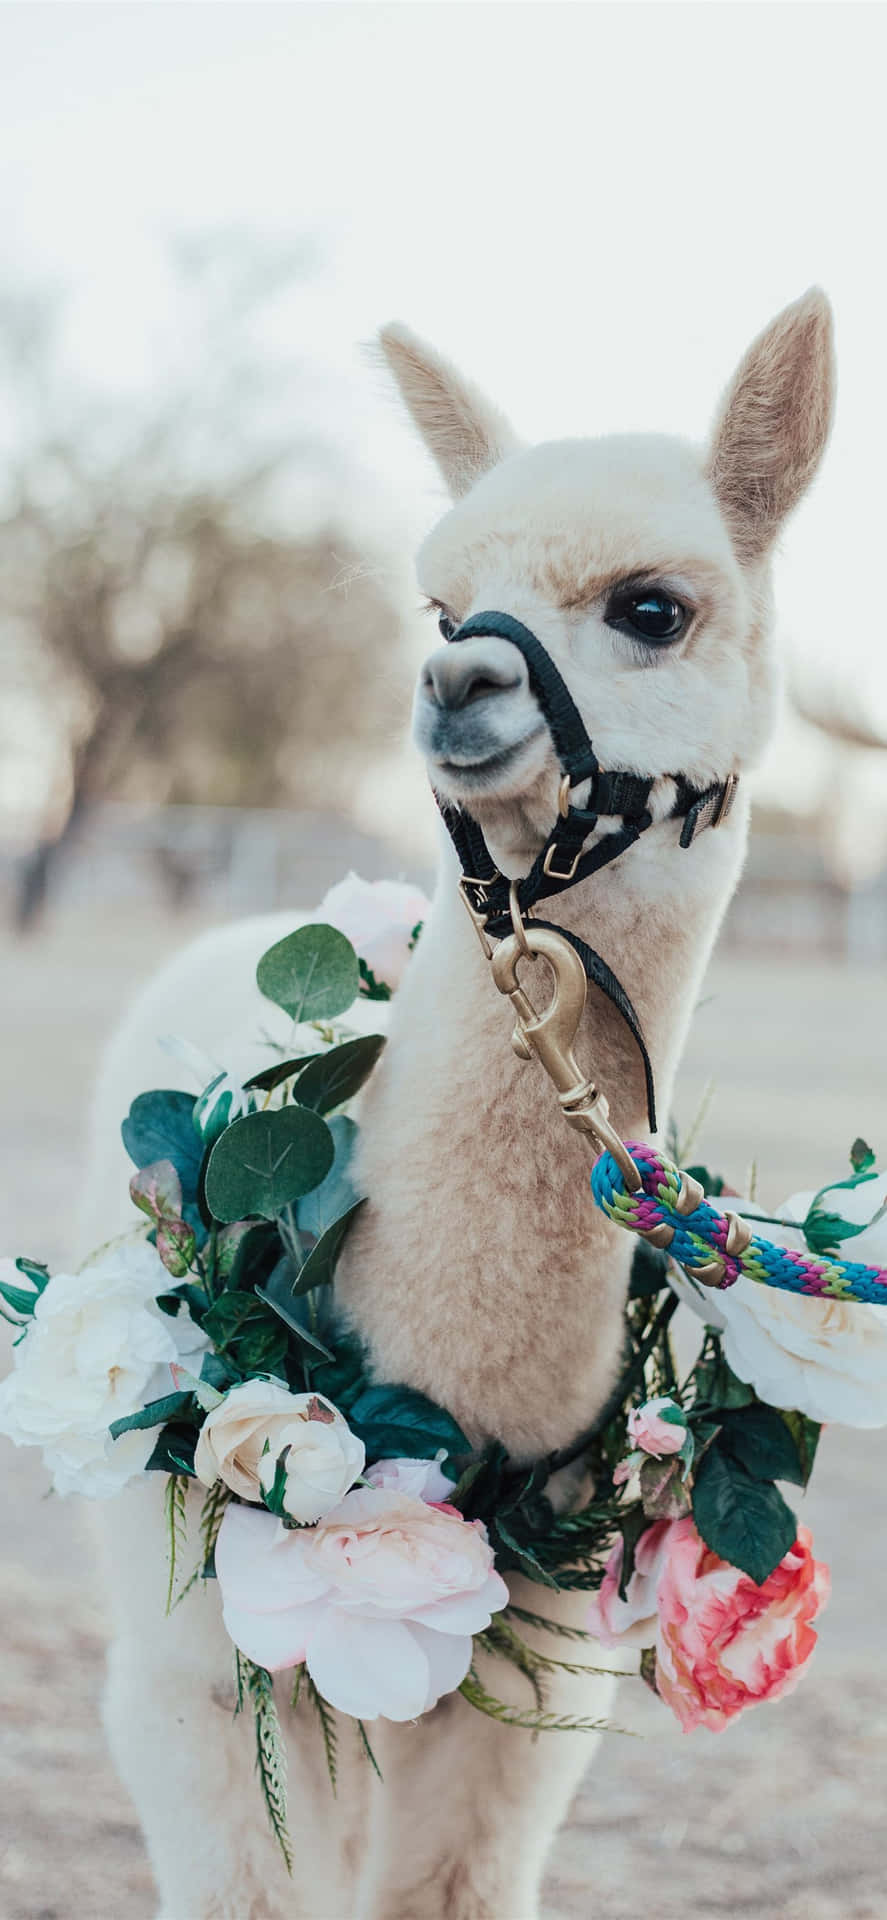 Funny Llama Pictures 1284 X 2778 Picture